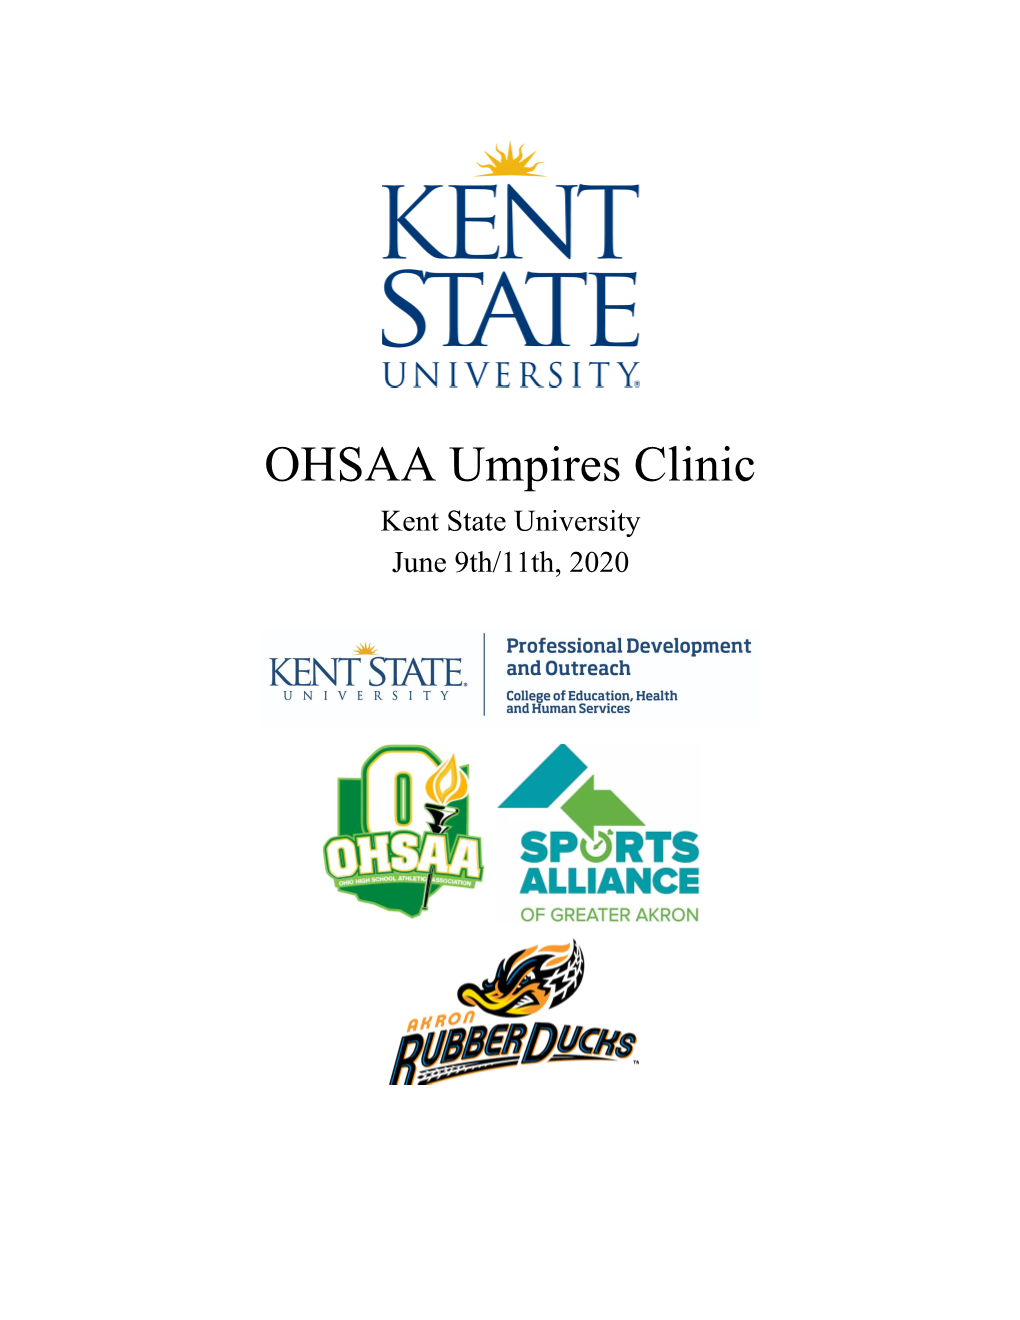 OHSAA Umpires Clinic Kent State University June 9Th/11Th, 2020